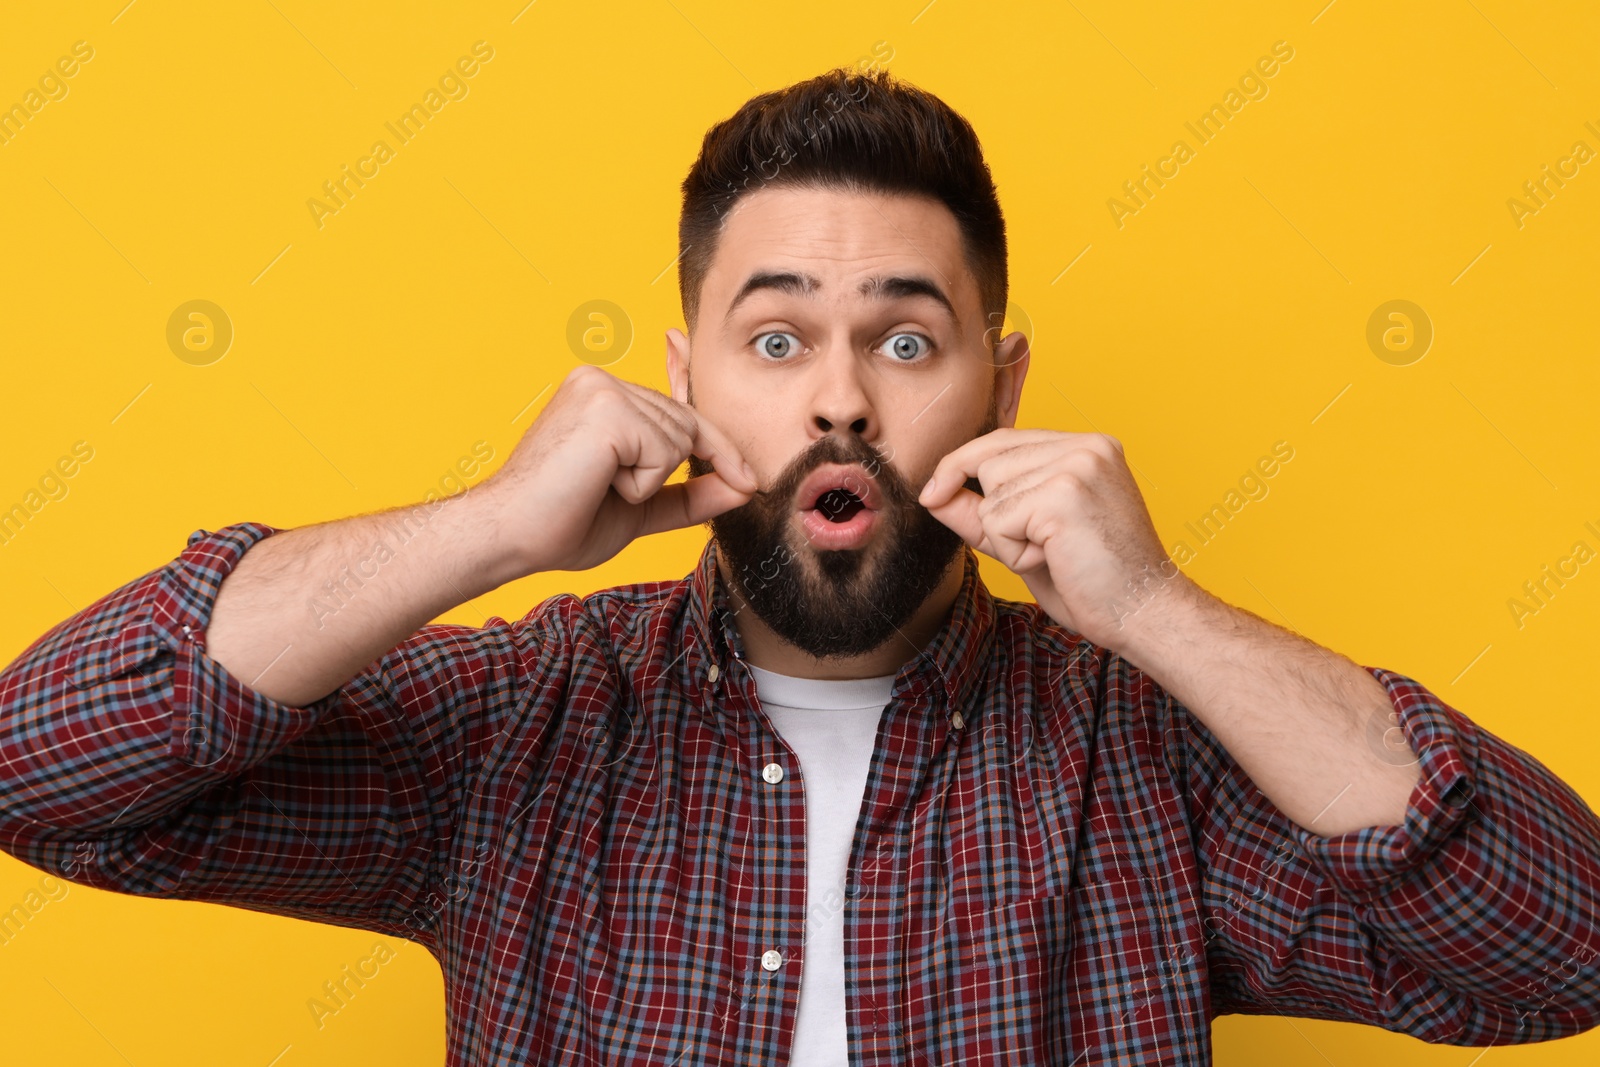 Photo of Surprised young man touching mustache on yellow background